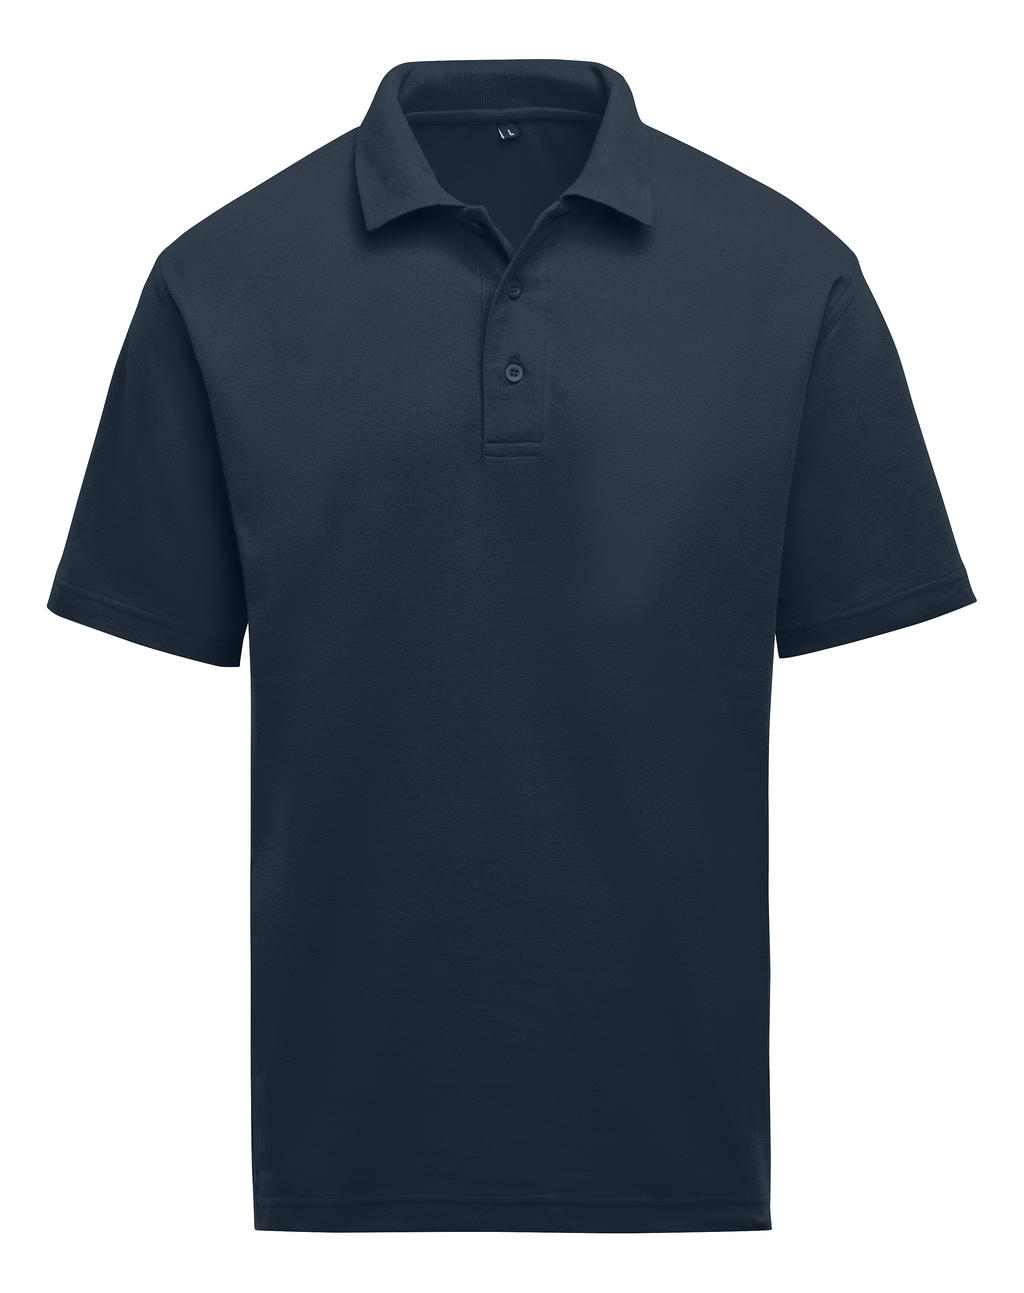  Unisex Polo in Farbe Navy